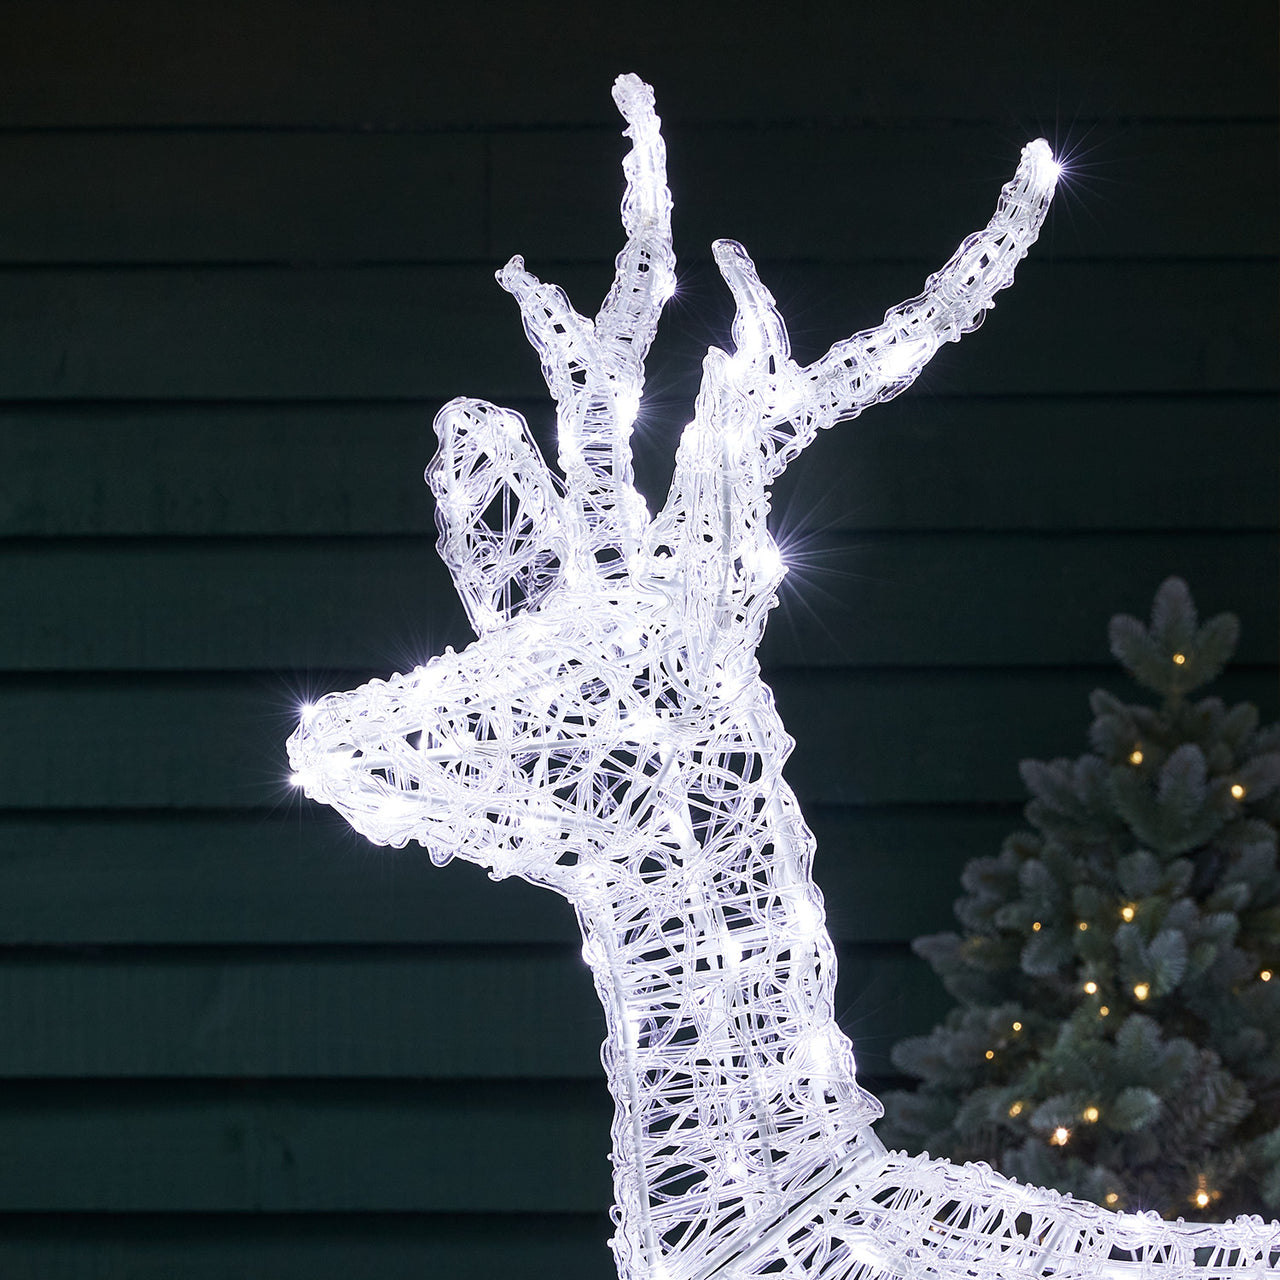 Swinsty Stag Dual Colour LED Light Up Reindeer